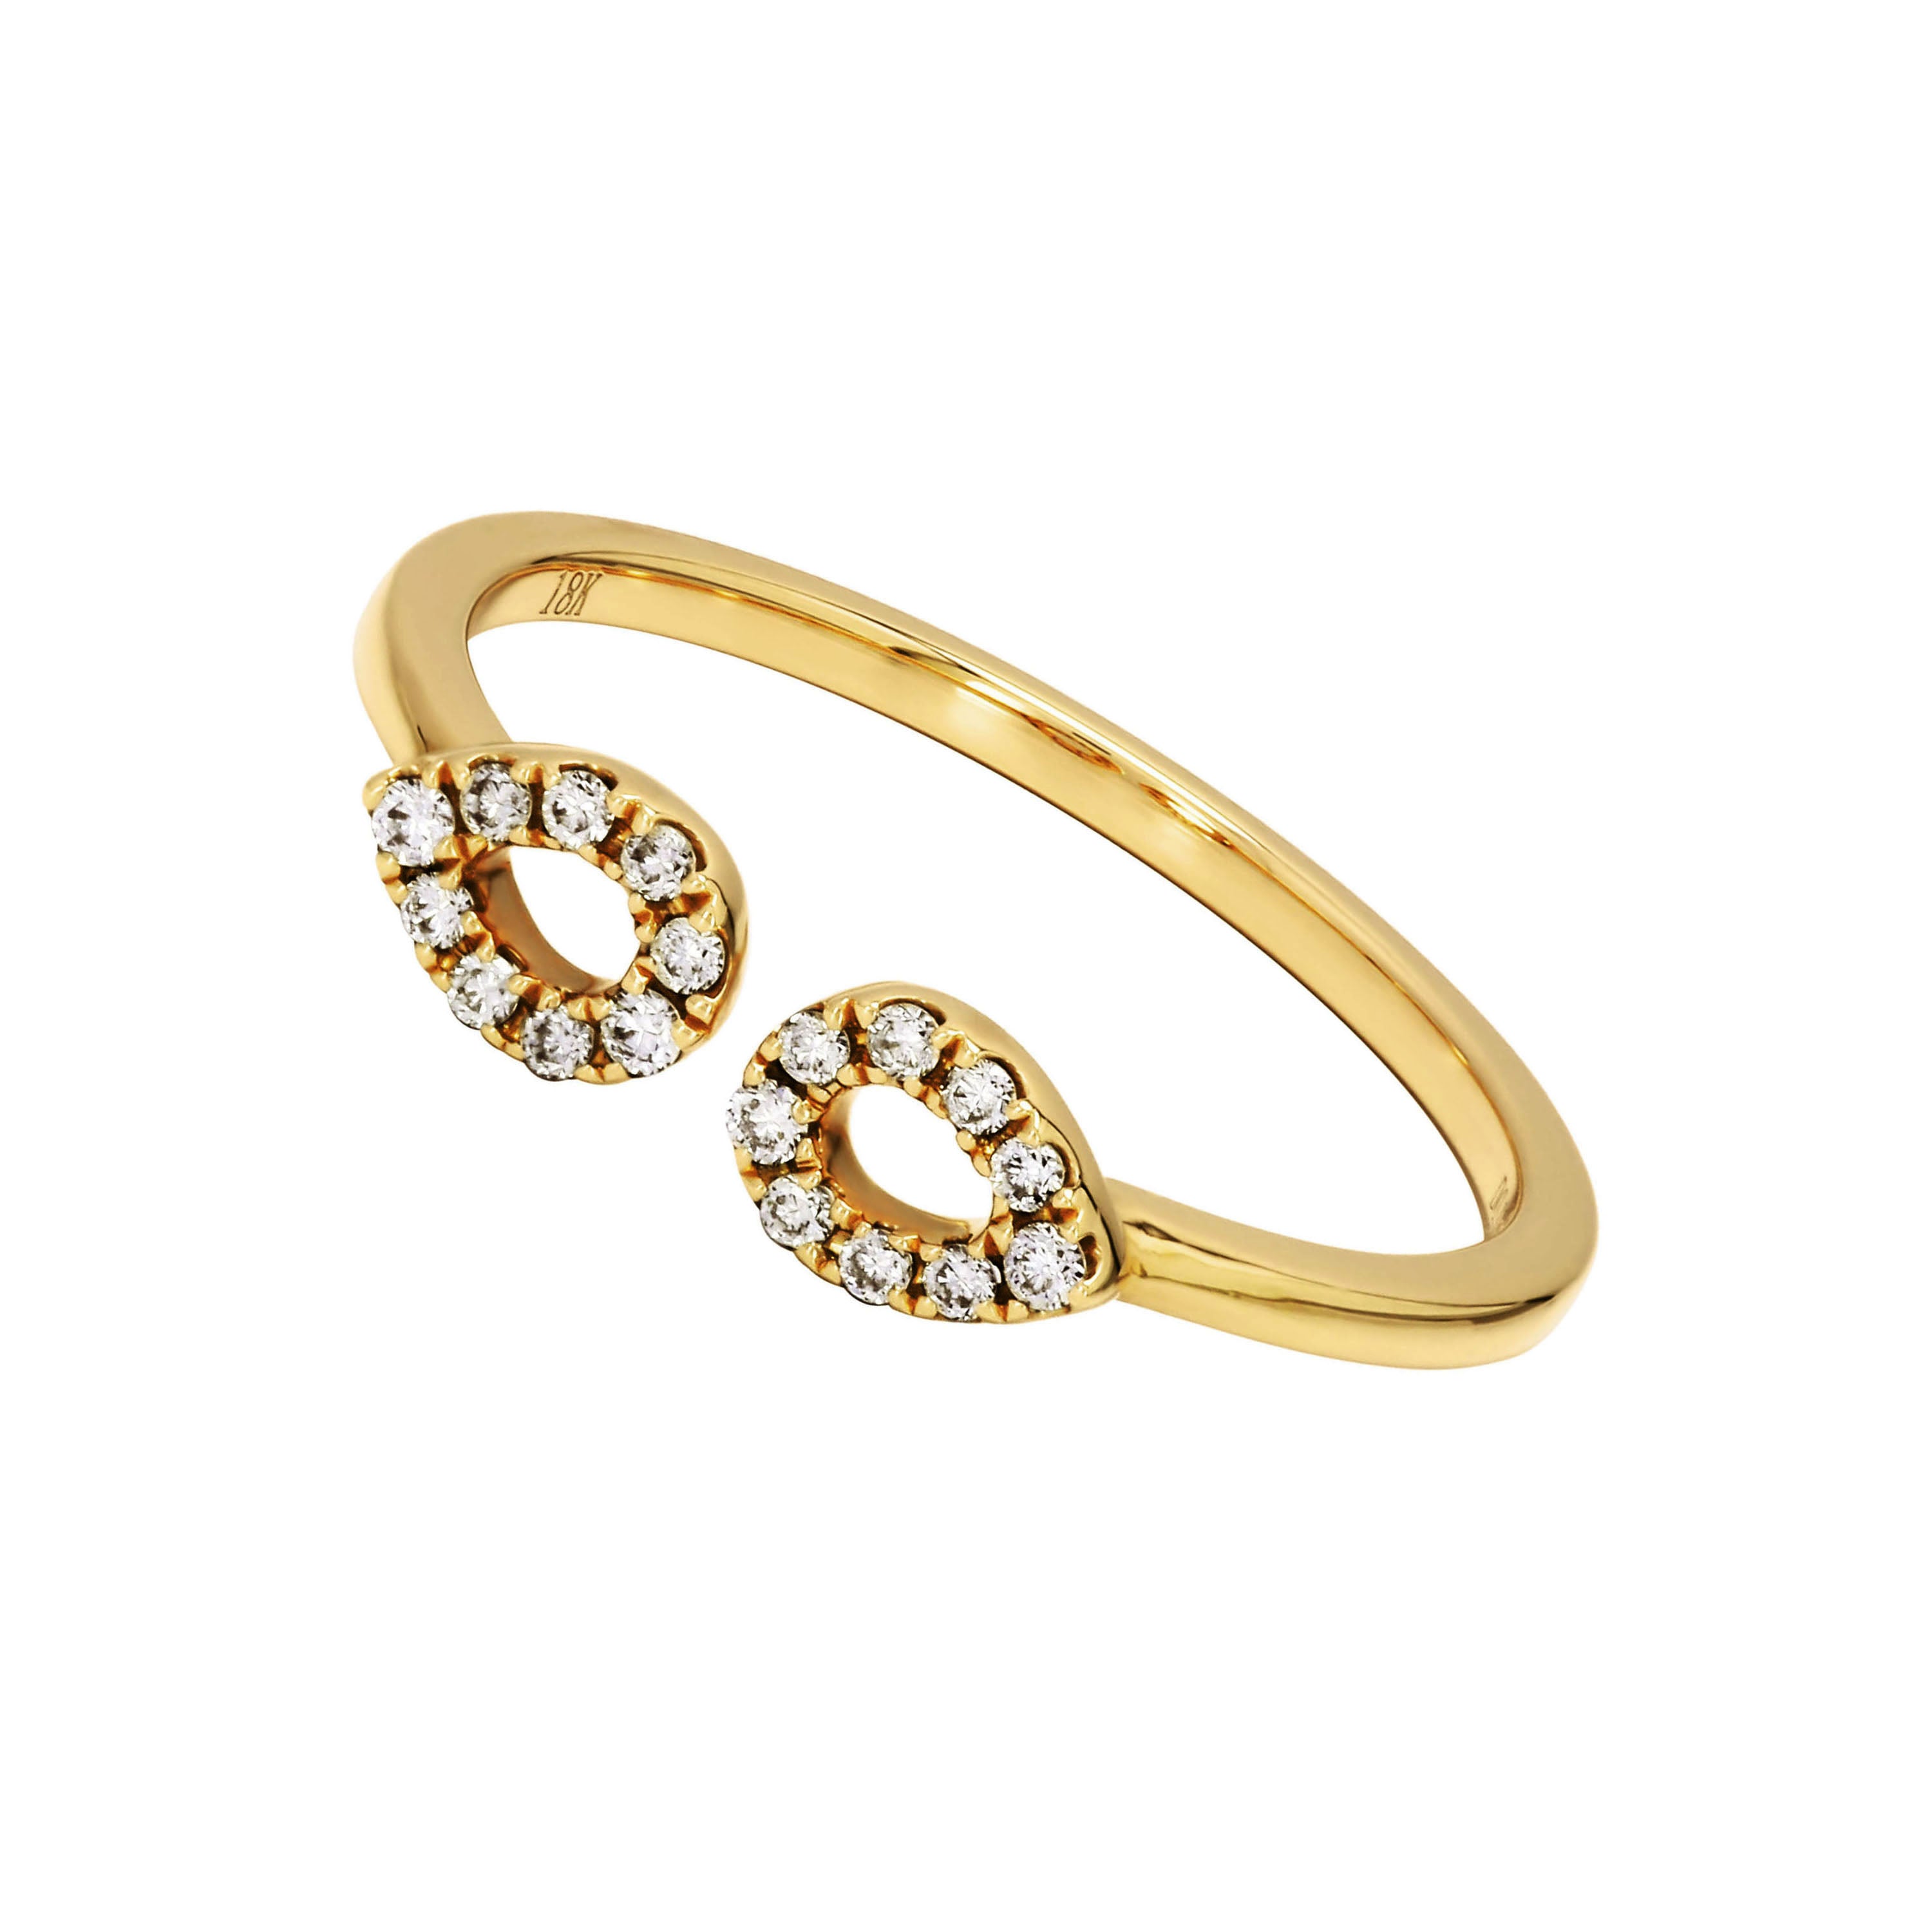 Adamar Jewels Double drop Ring in 18K yellow gold set with diamonds